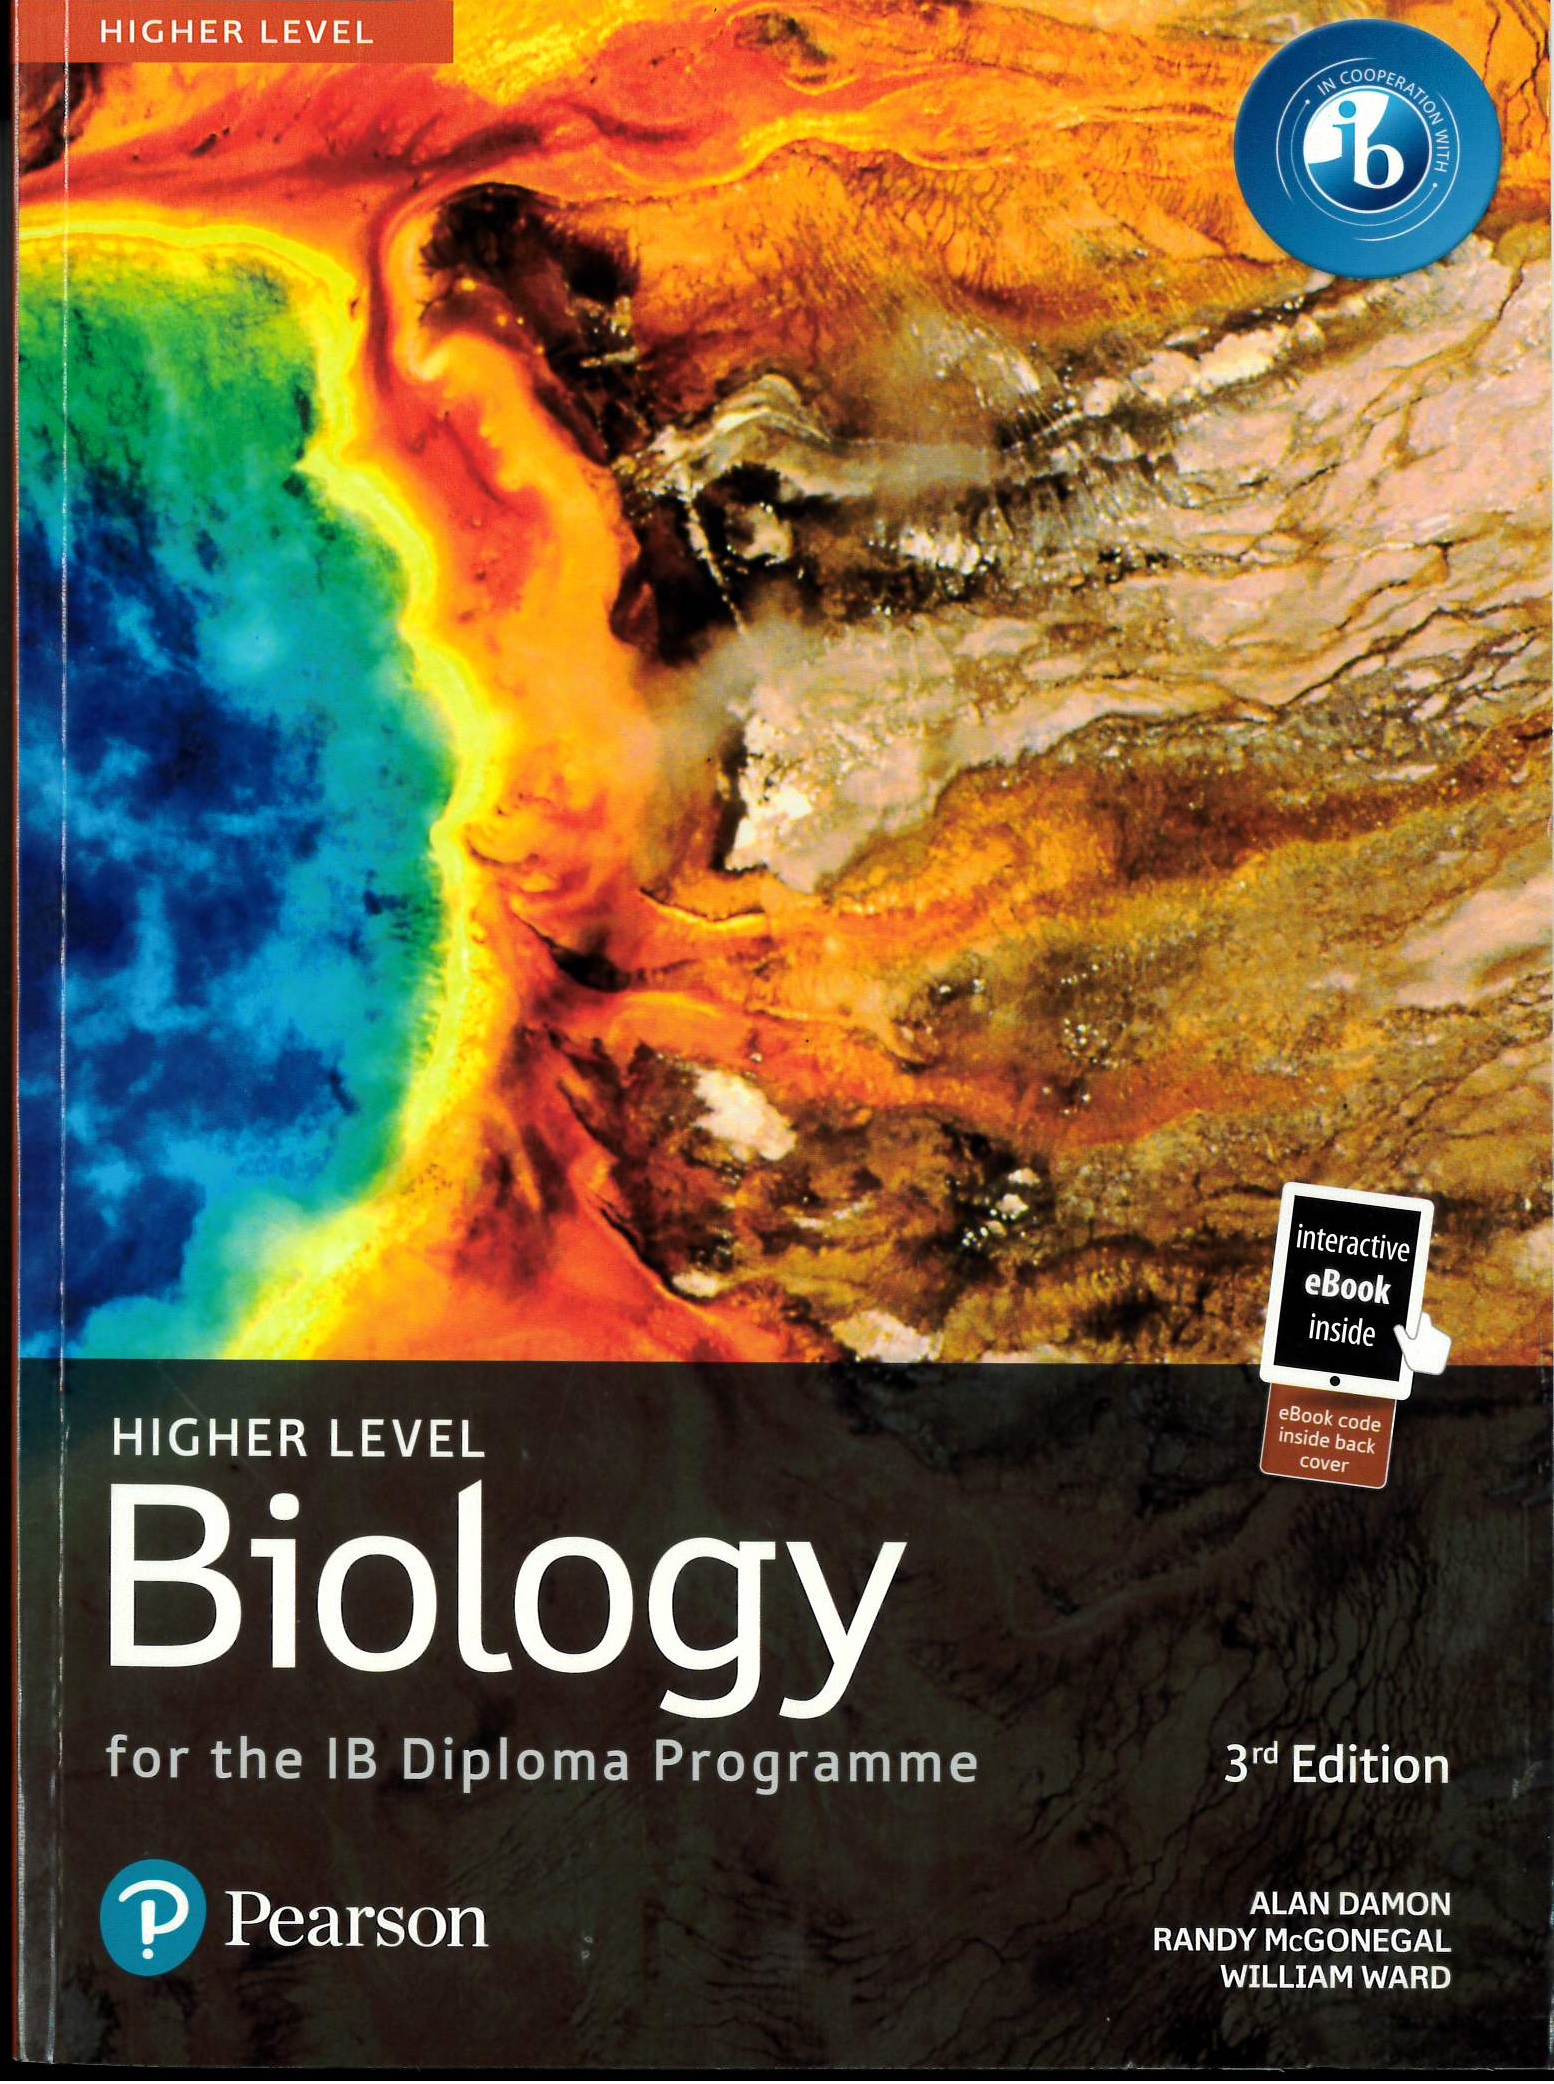 Biology [higher level] : for the IB diploma programme